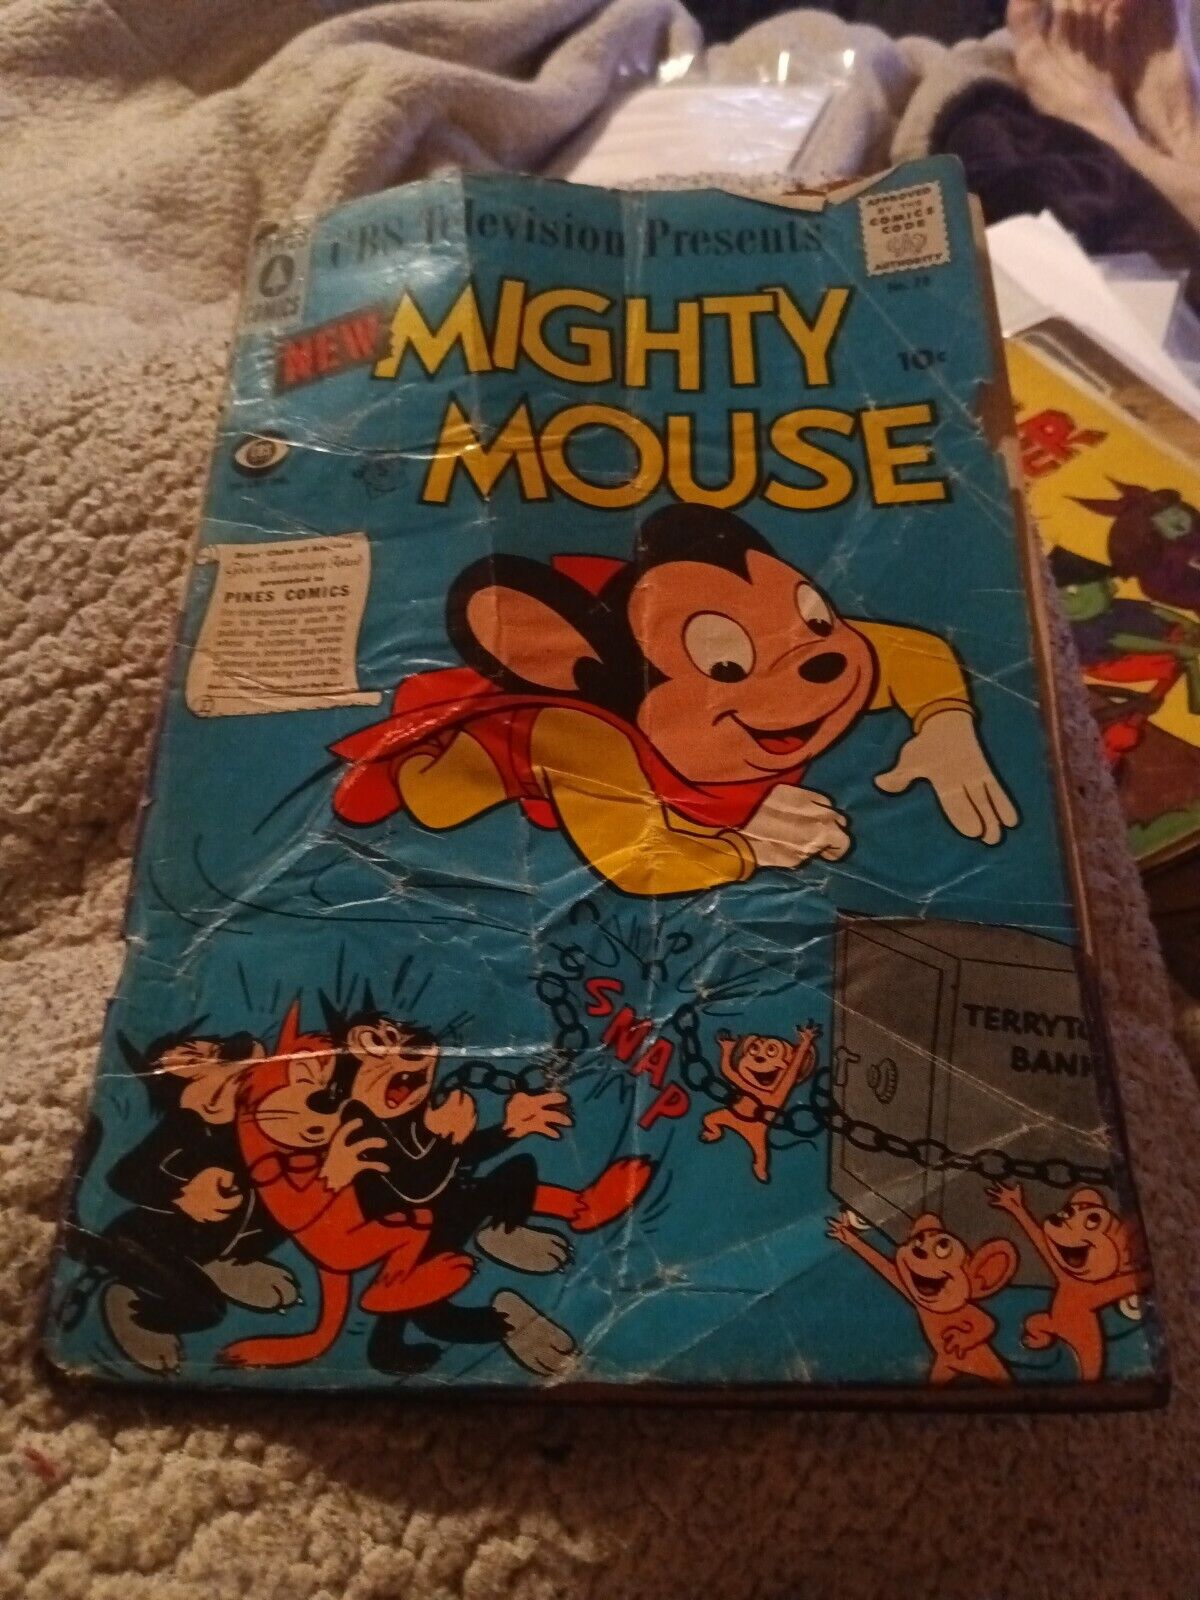 MIGHTY MOUSE #78 June 1958 PINES COMICS SILVER AGE TERRY TOONS